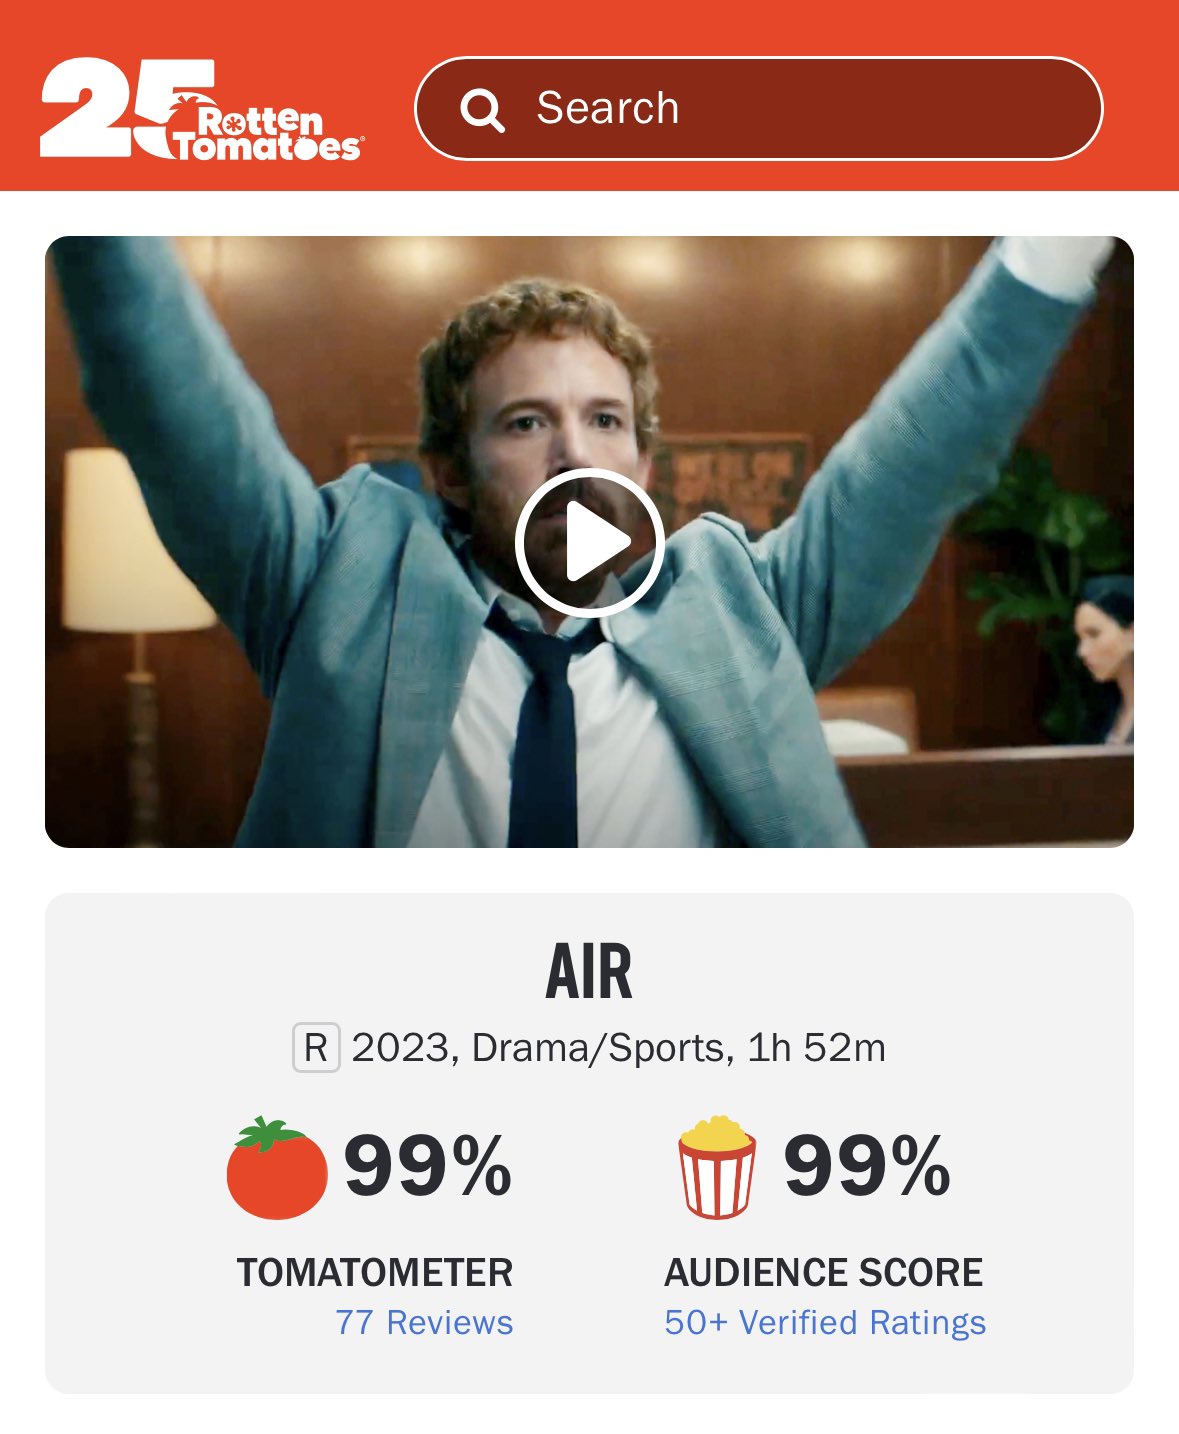 Air - Rotten Tomatoes